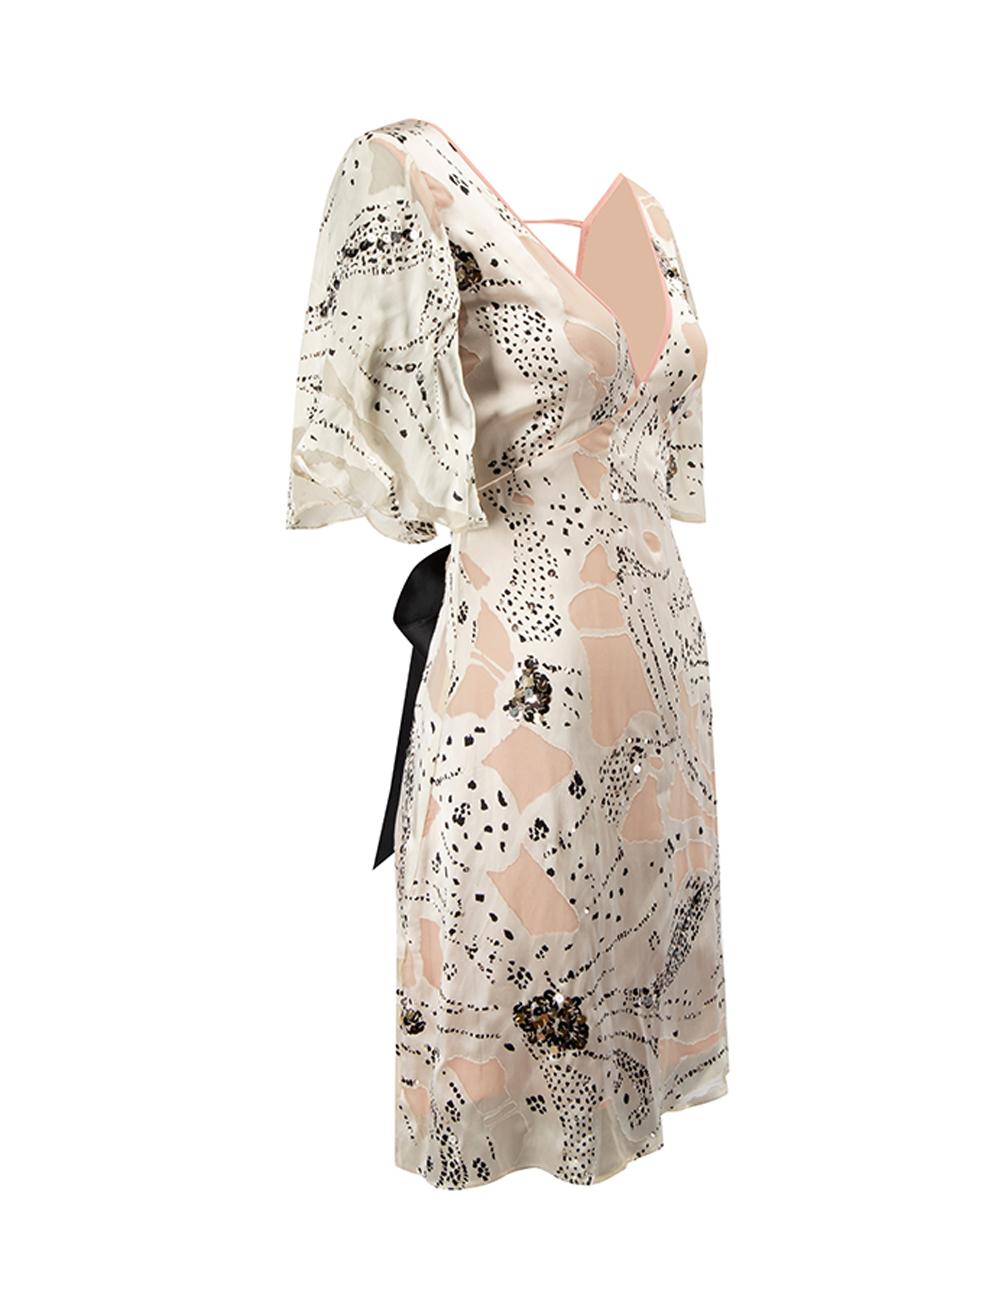 CONDITION is Good. General wear to dress is evident. Moderate signs of wear to the top of the zip seam with tearing of the chiffon, small mark at the right-side of the bust and there are a few missing sequins on this used Temperley London designer